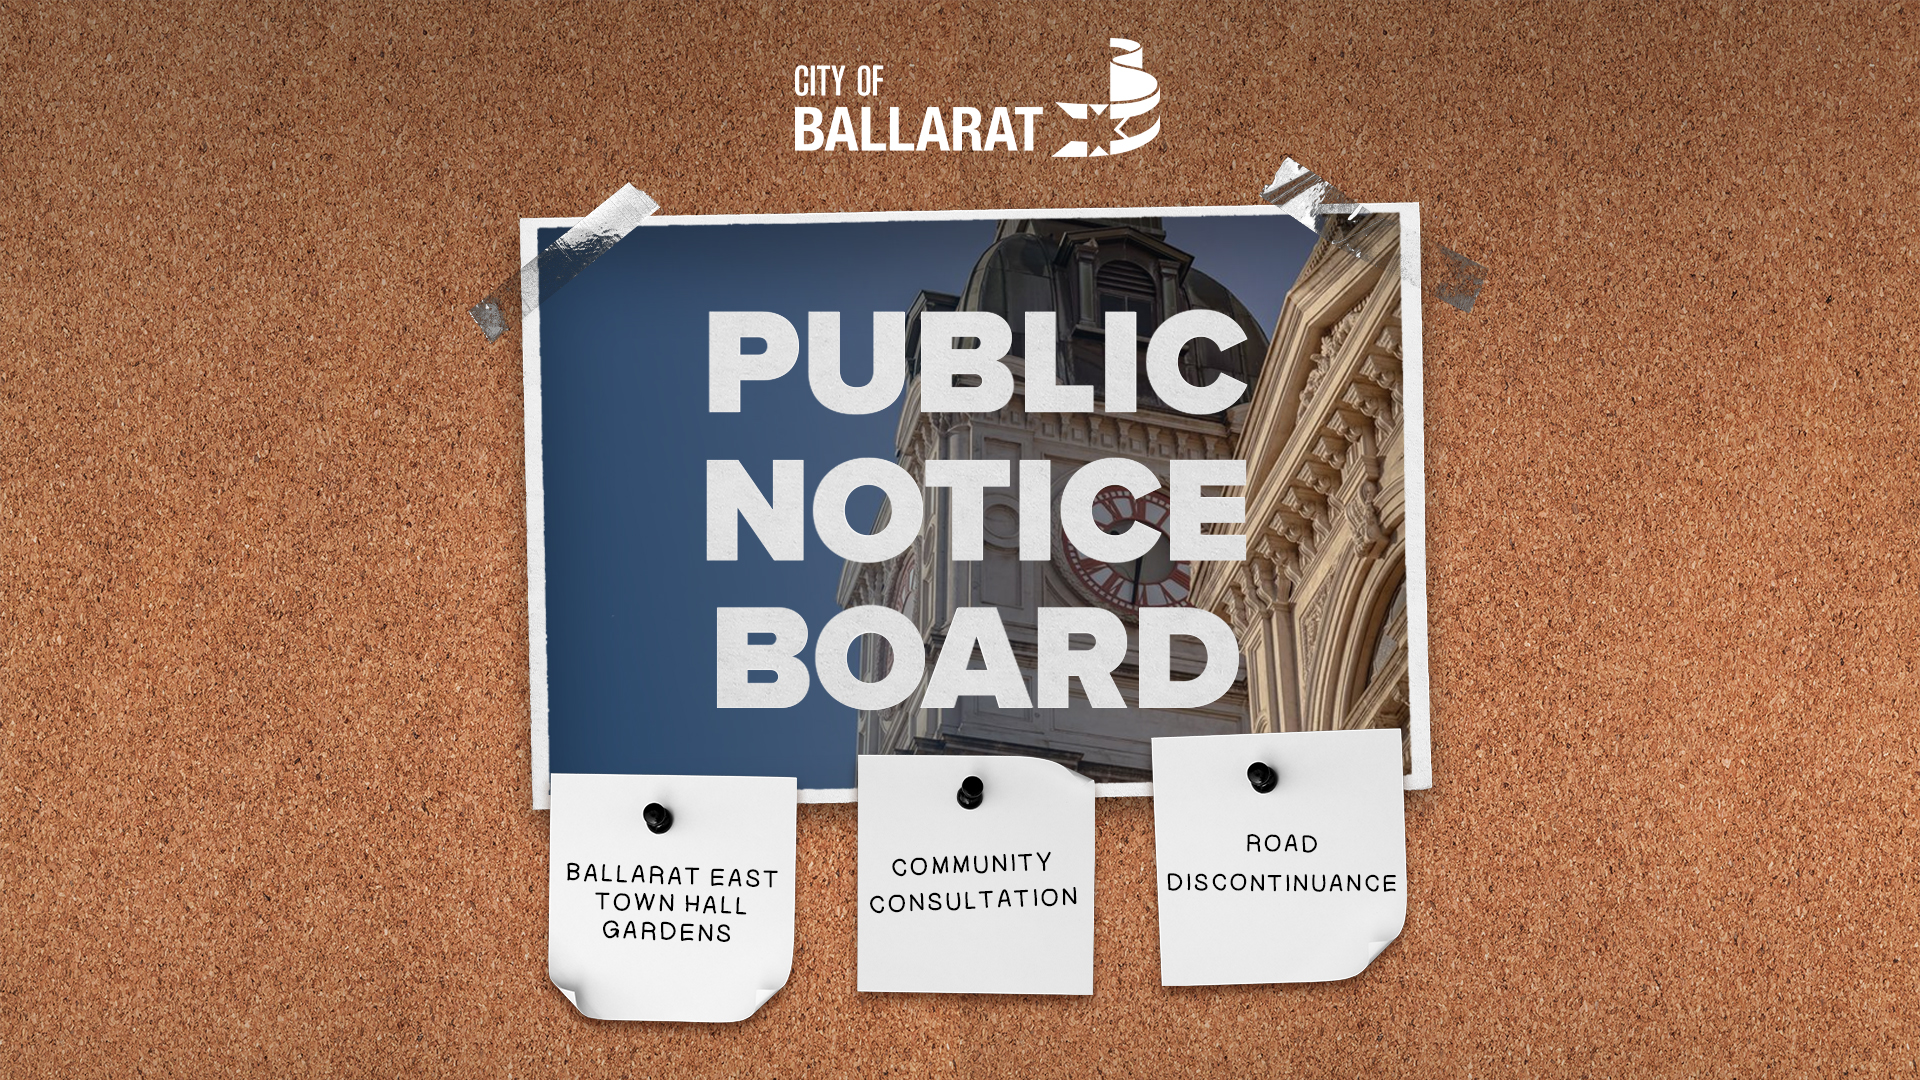 Notice board with Public Notice Board text over an image of Ballarat Town Hall. Three notes underneath with text saying Ballarat East Town Hall Gardens, Community Consultation, Road Discontinuance